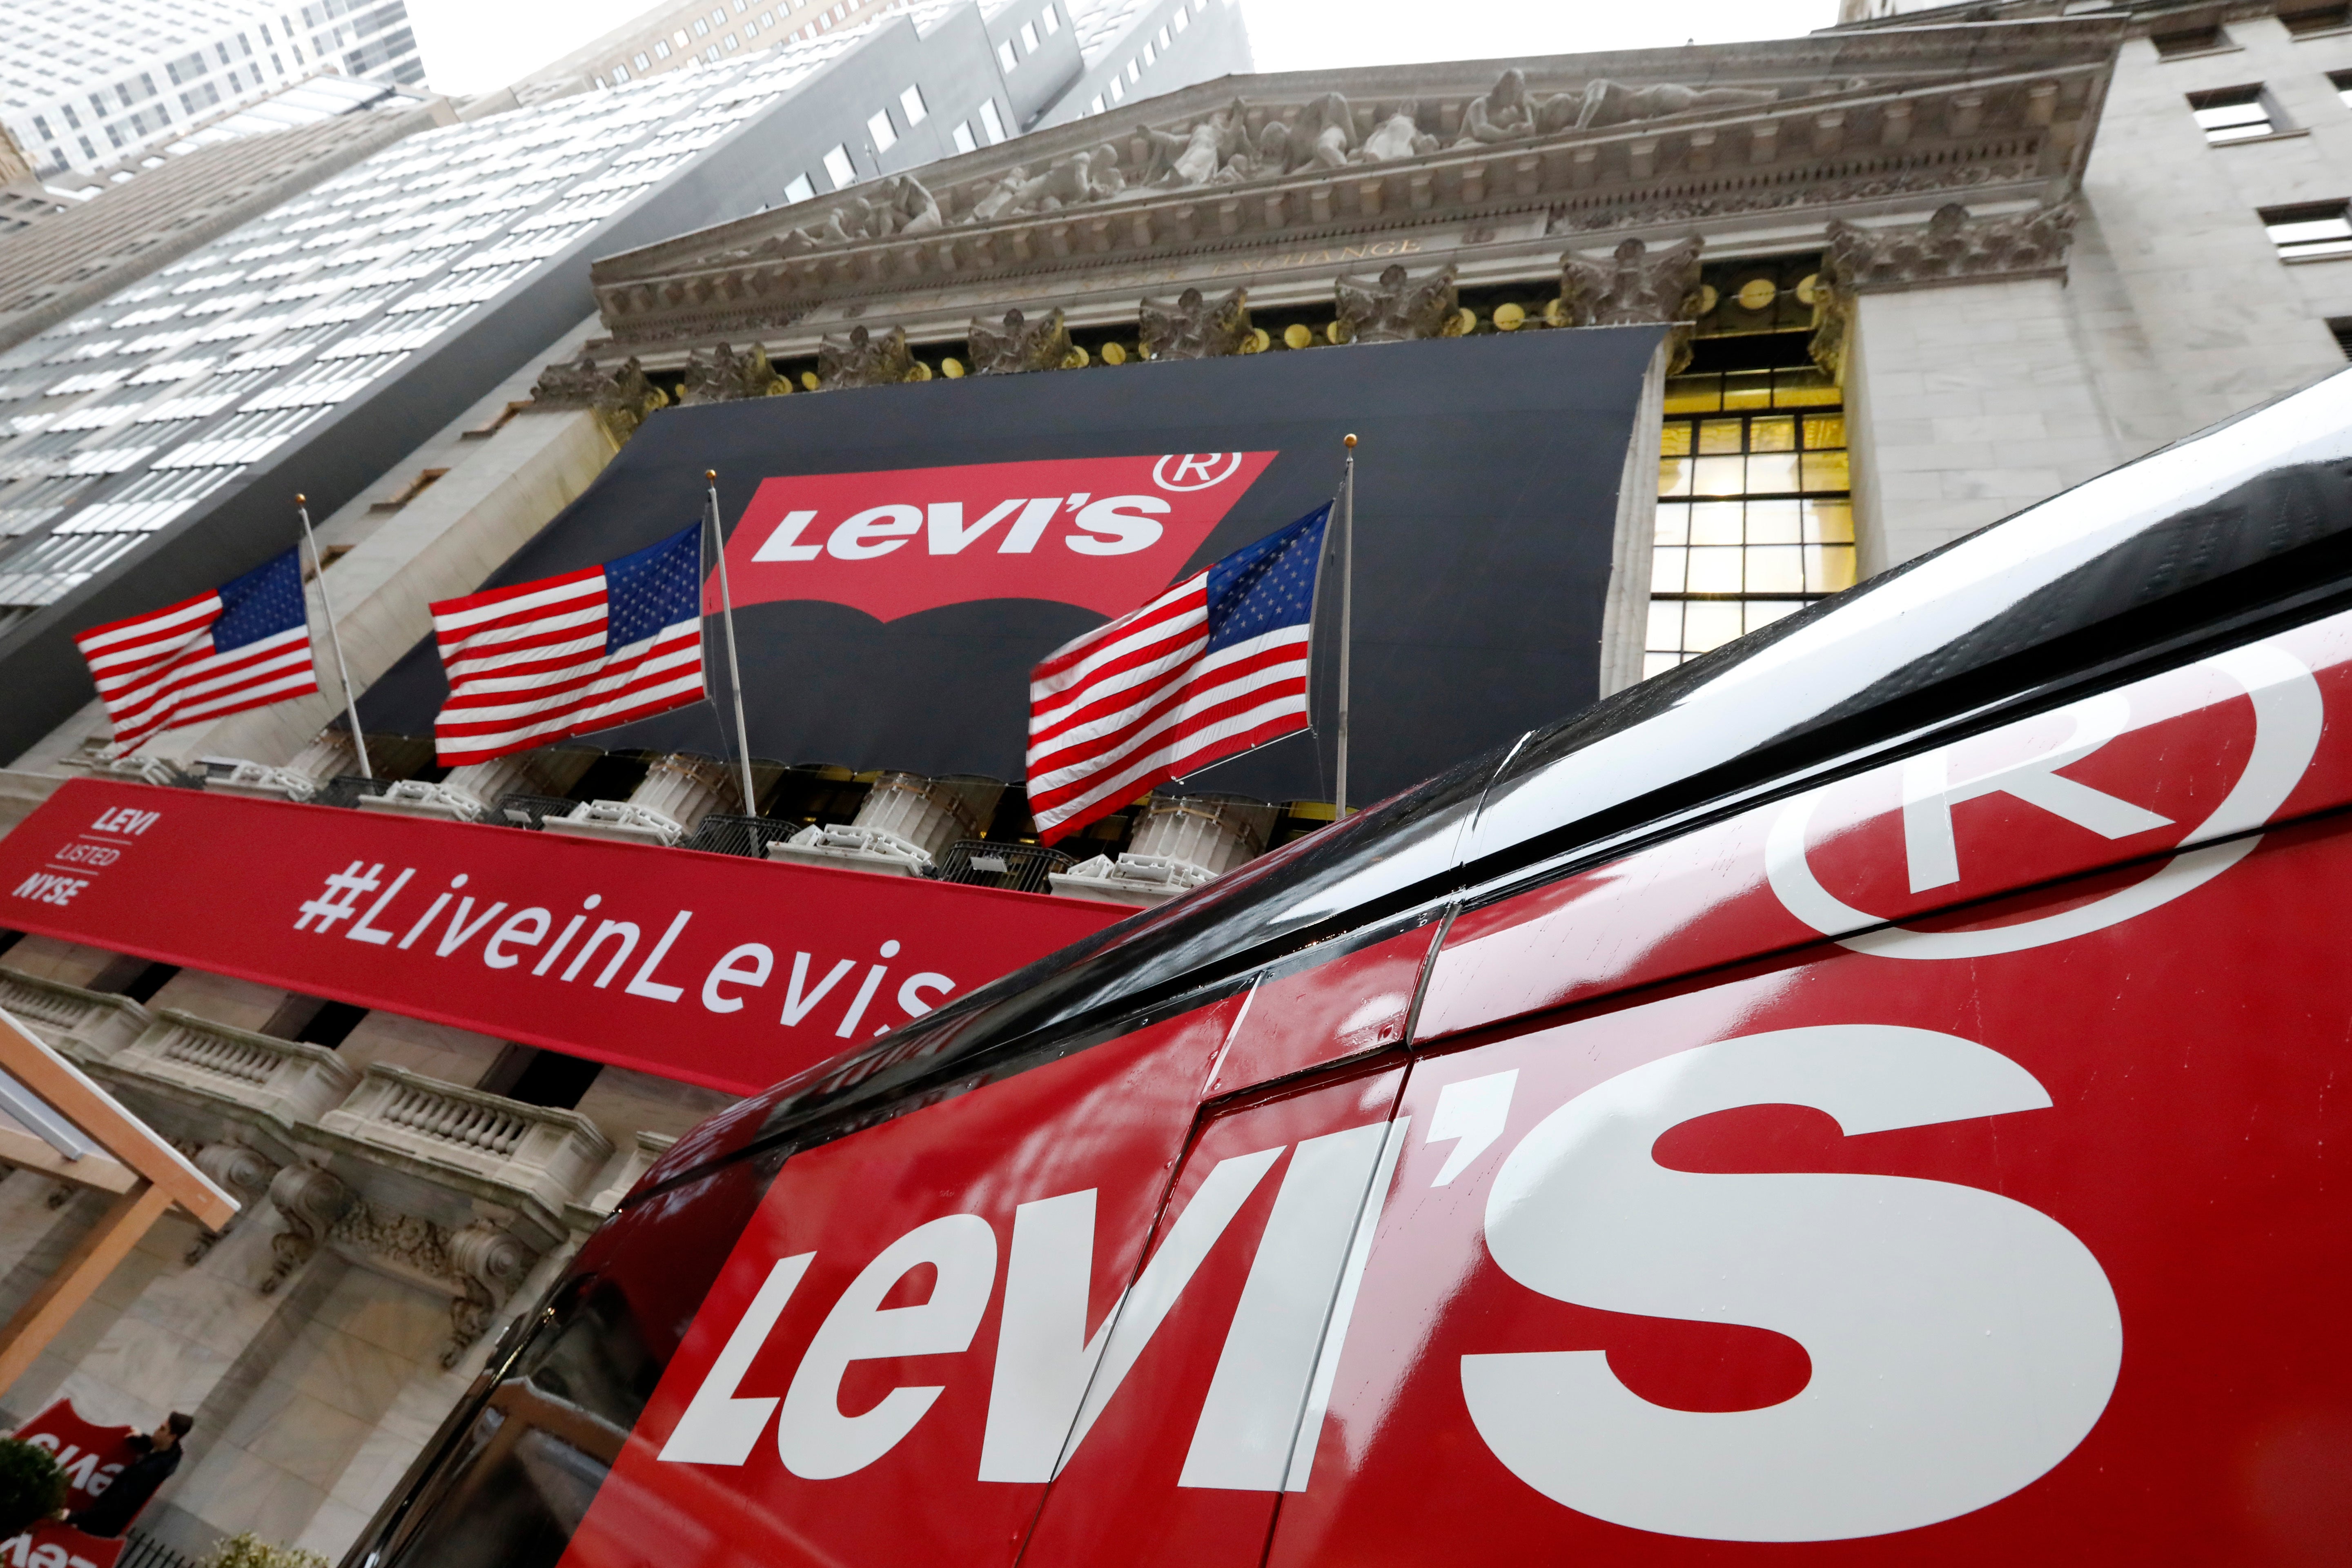 Levi's 501 jeans are our 'No. 1 seller' in Asia, says CEO 